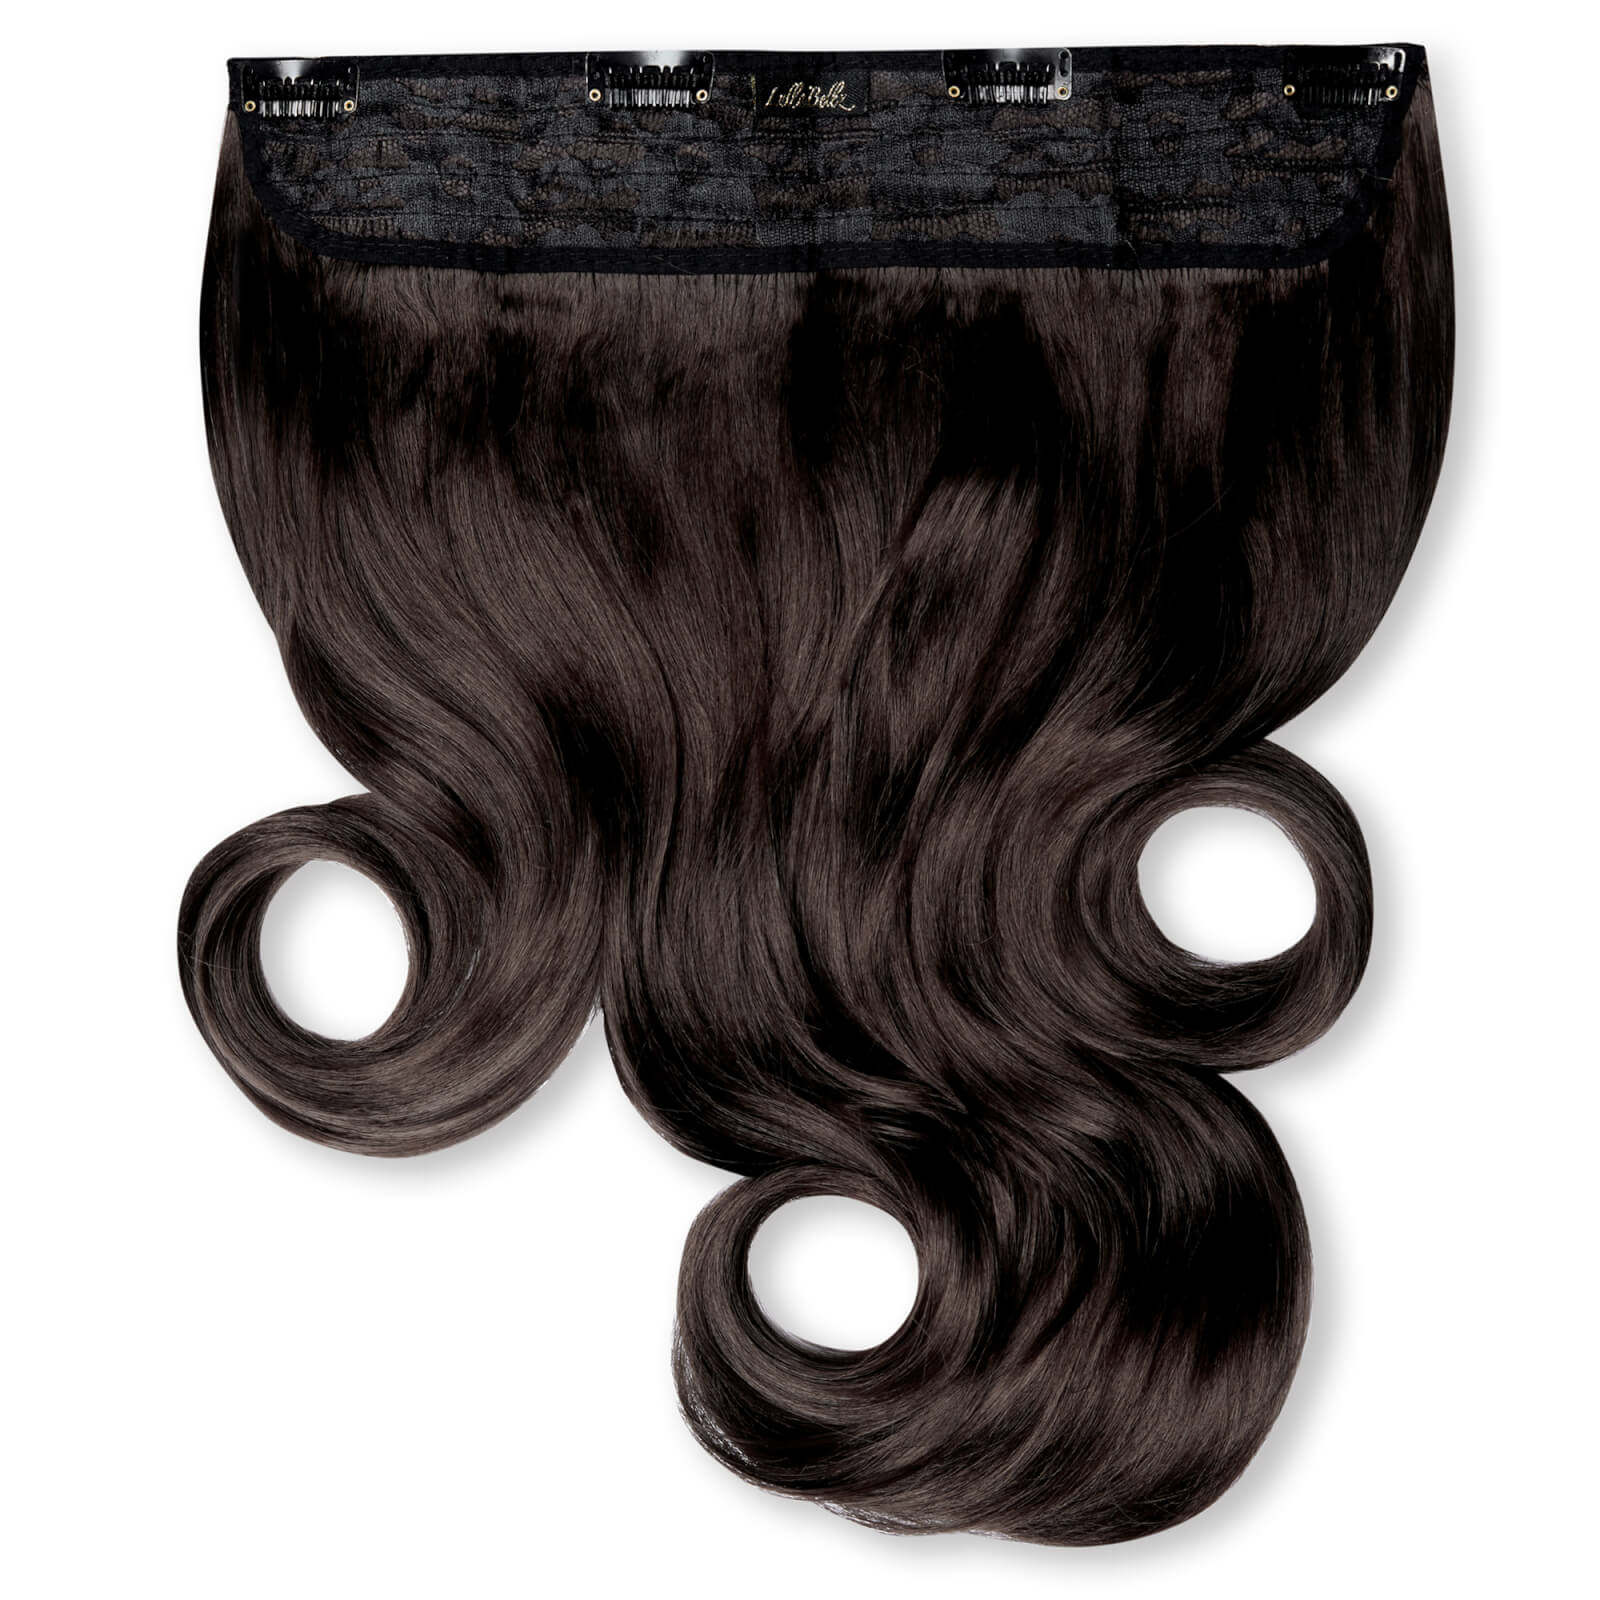 Image of LullaBellz Thick 16 1-Piece Curly Clip in Hair Extensions (Various Colours) - Dark Brown